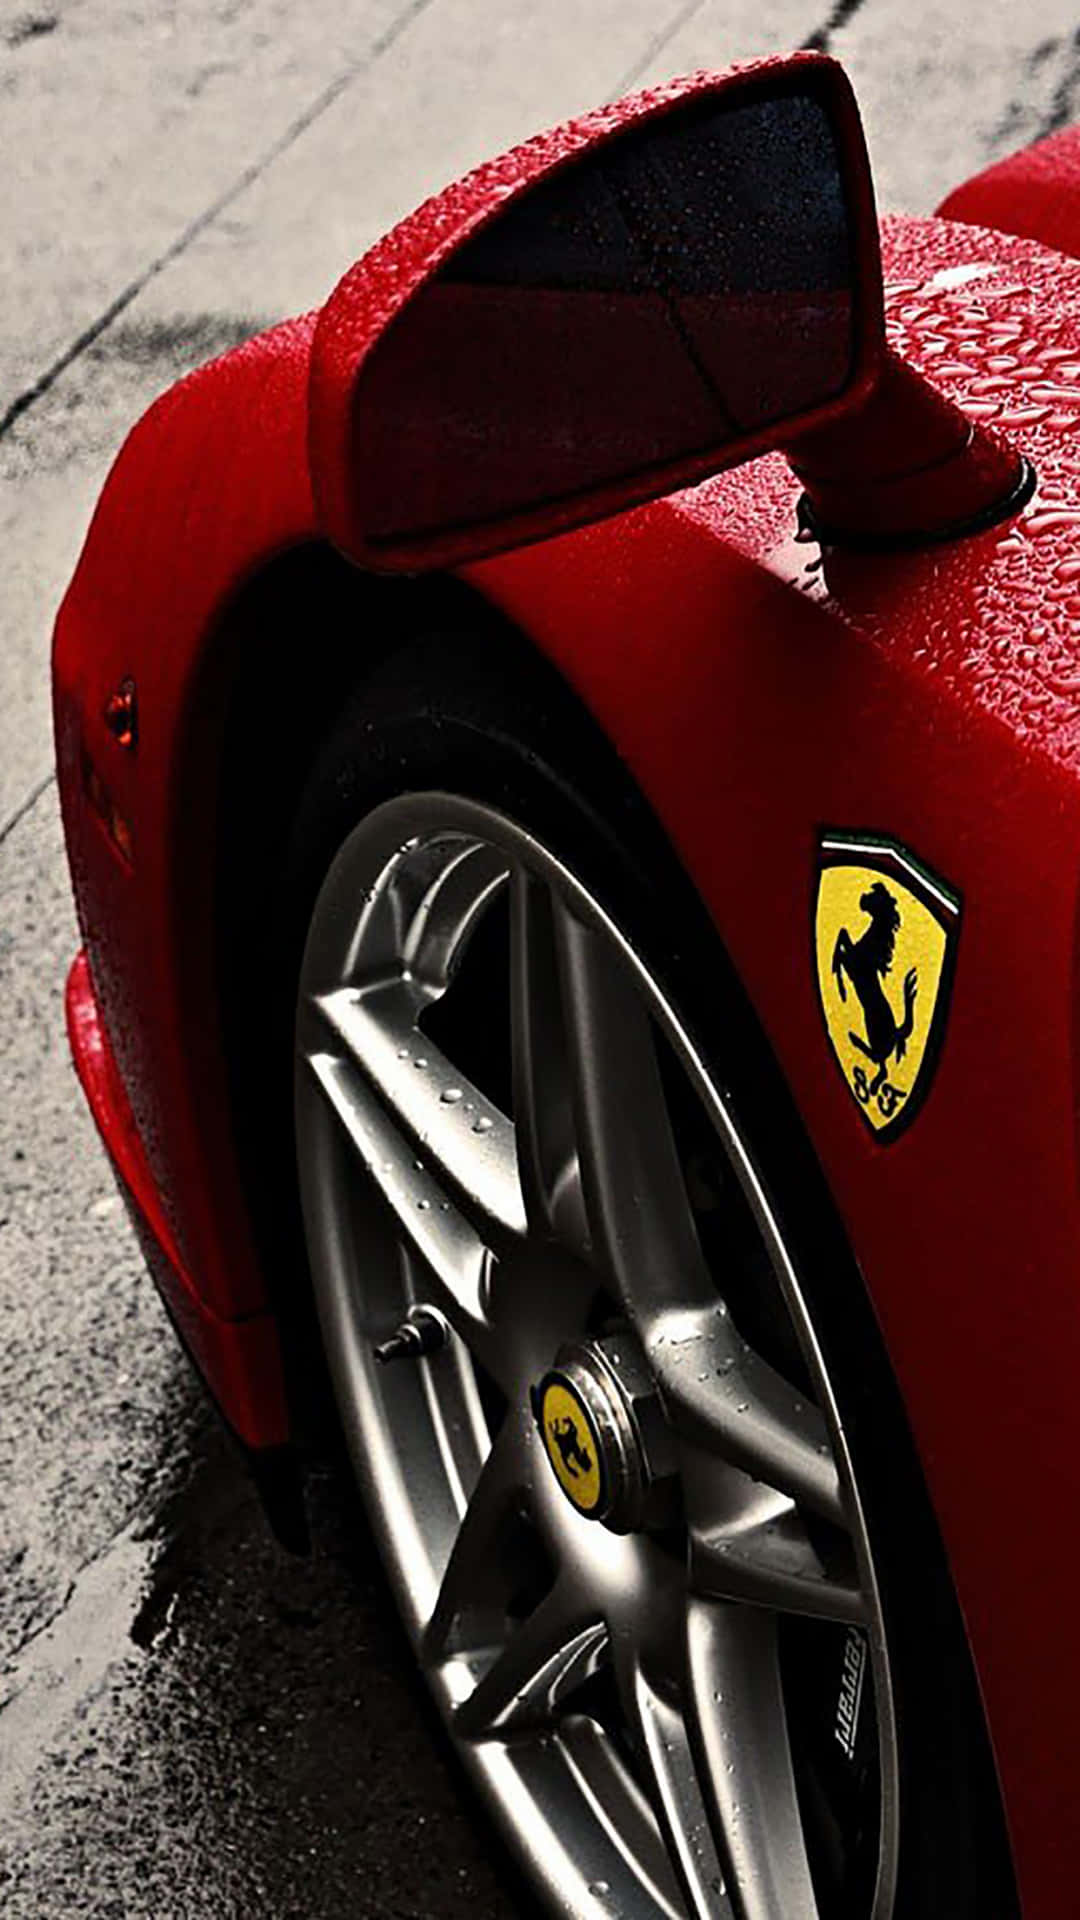 Get the Power and Prestige of a Ferrari with the iPhone X Wallpaper